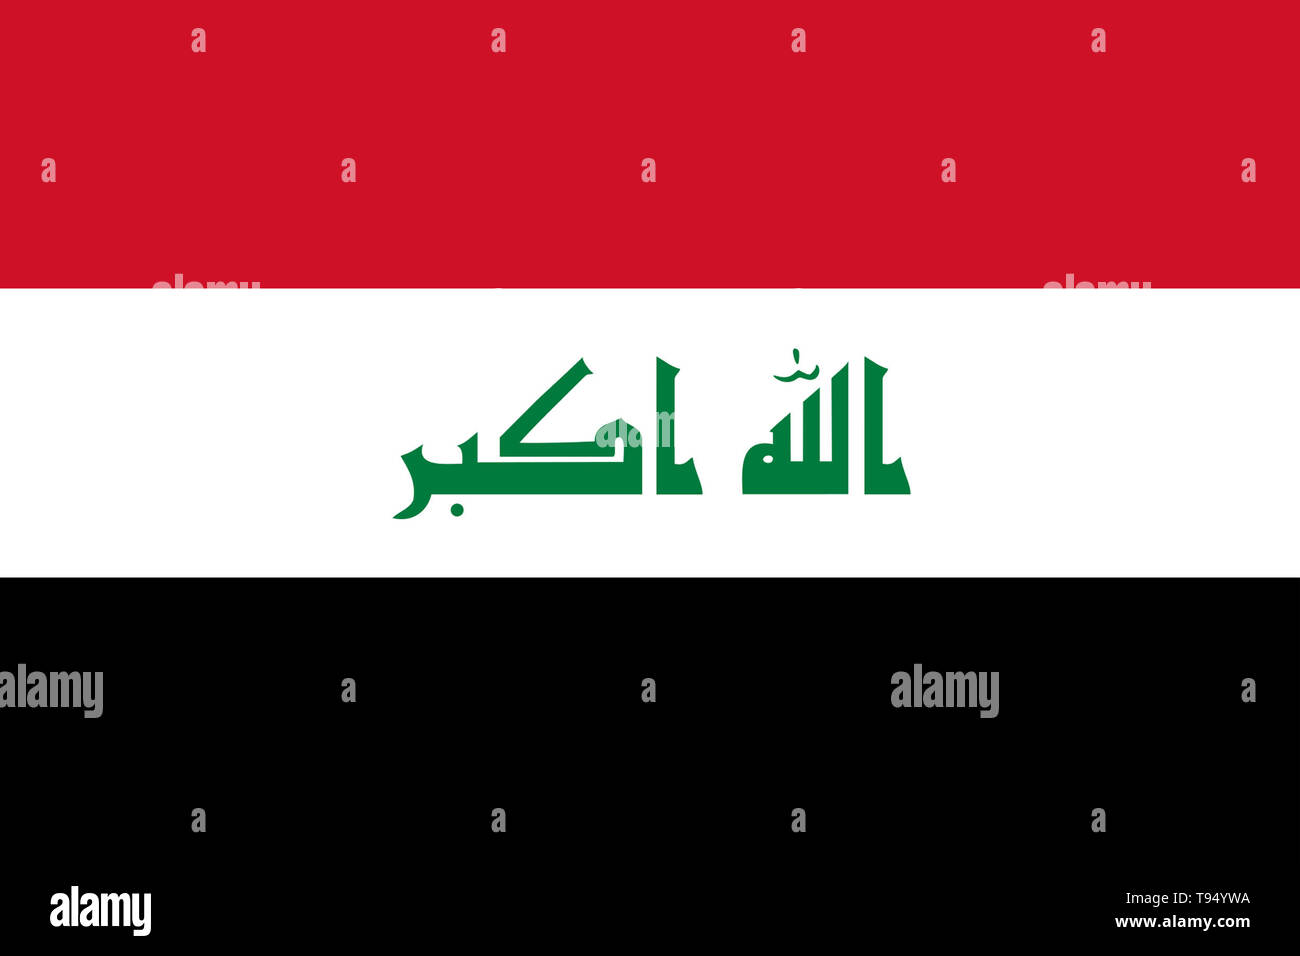 https://c8.alamy.com/comp/T94YWA/the-flag-of-iraq-a-design-confirmed-in-january-of-2008-T94YWA.jpg